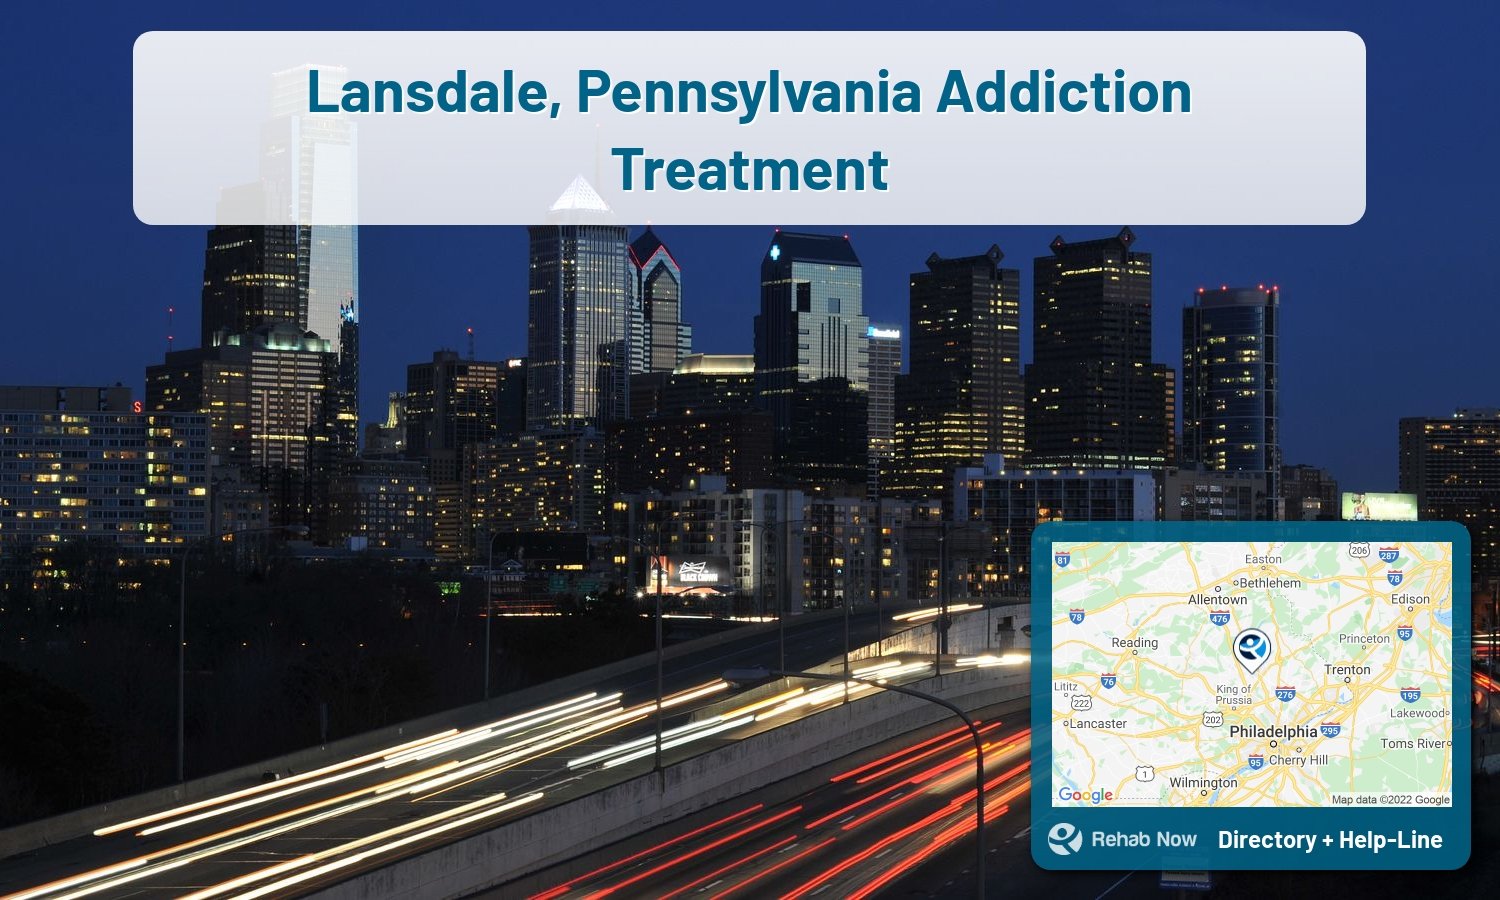 Our experts can help you find treatment now in Lansdale, Pennsylvania. We list drug rehab and alcohol centers in Pennsylvania.